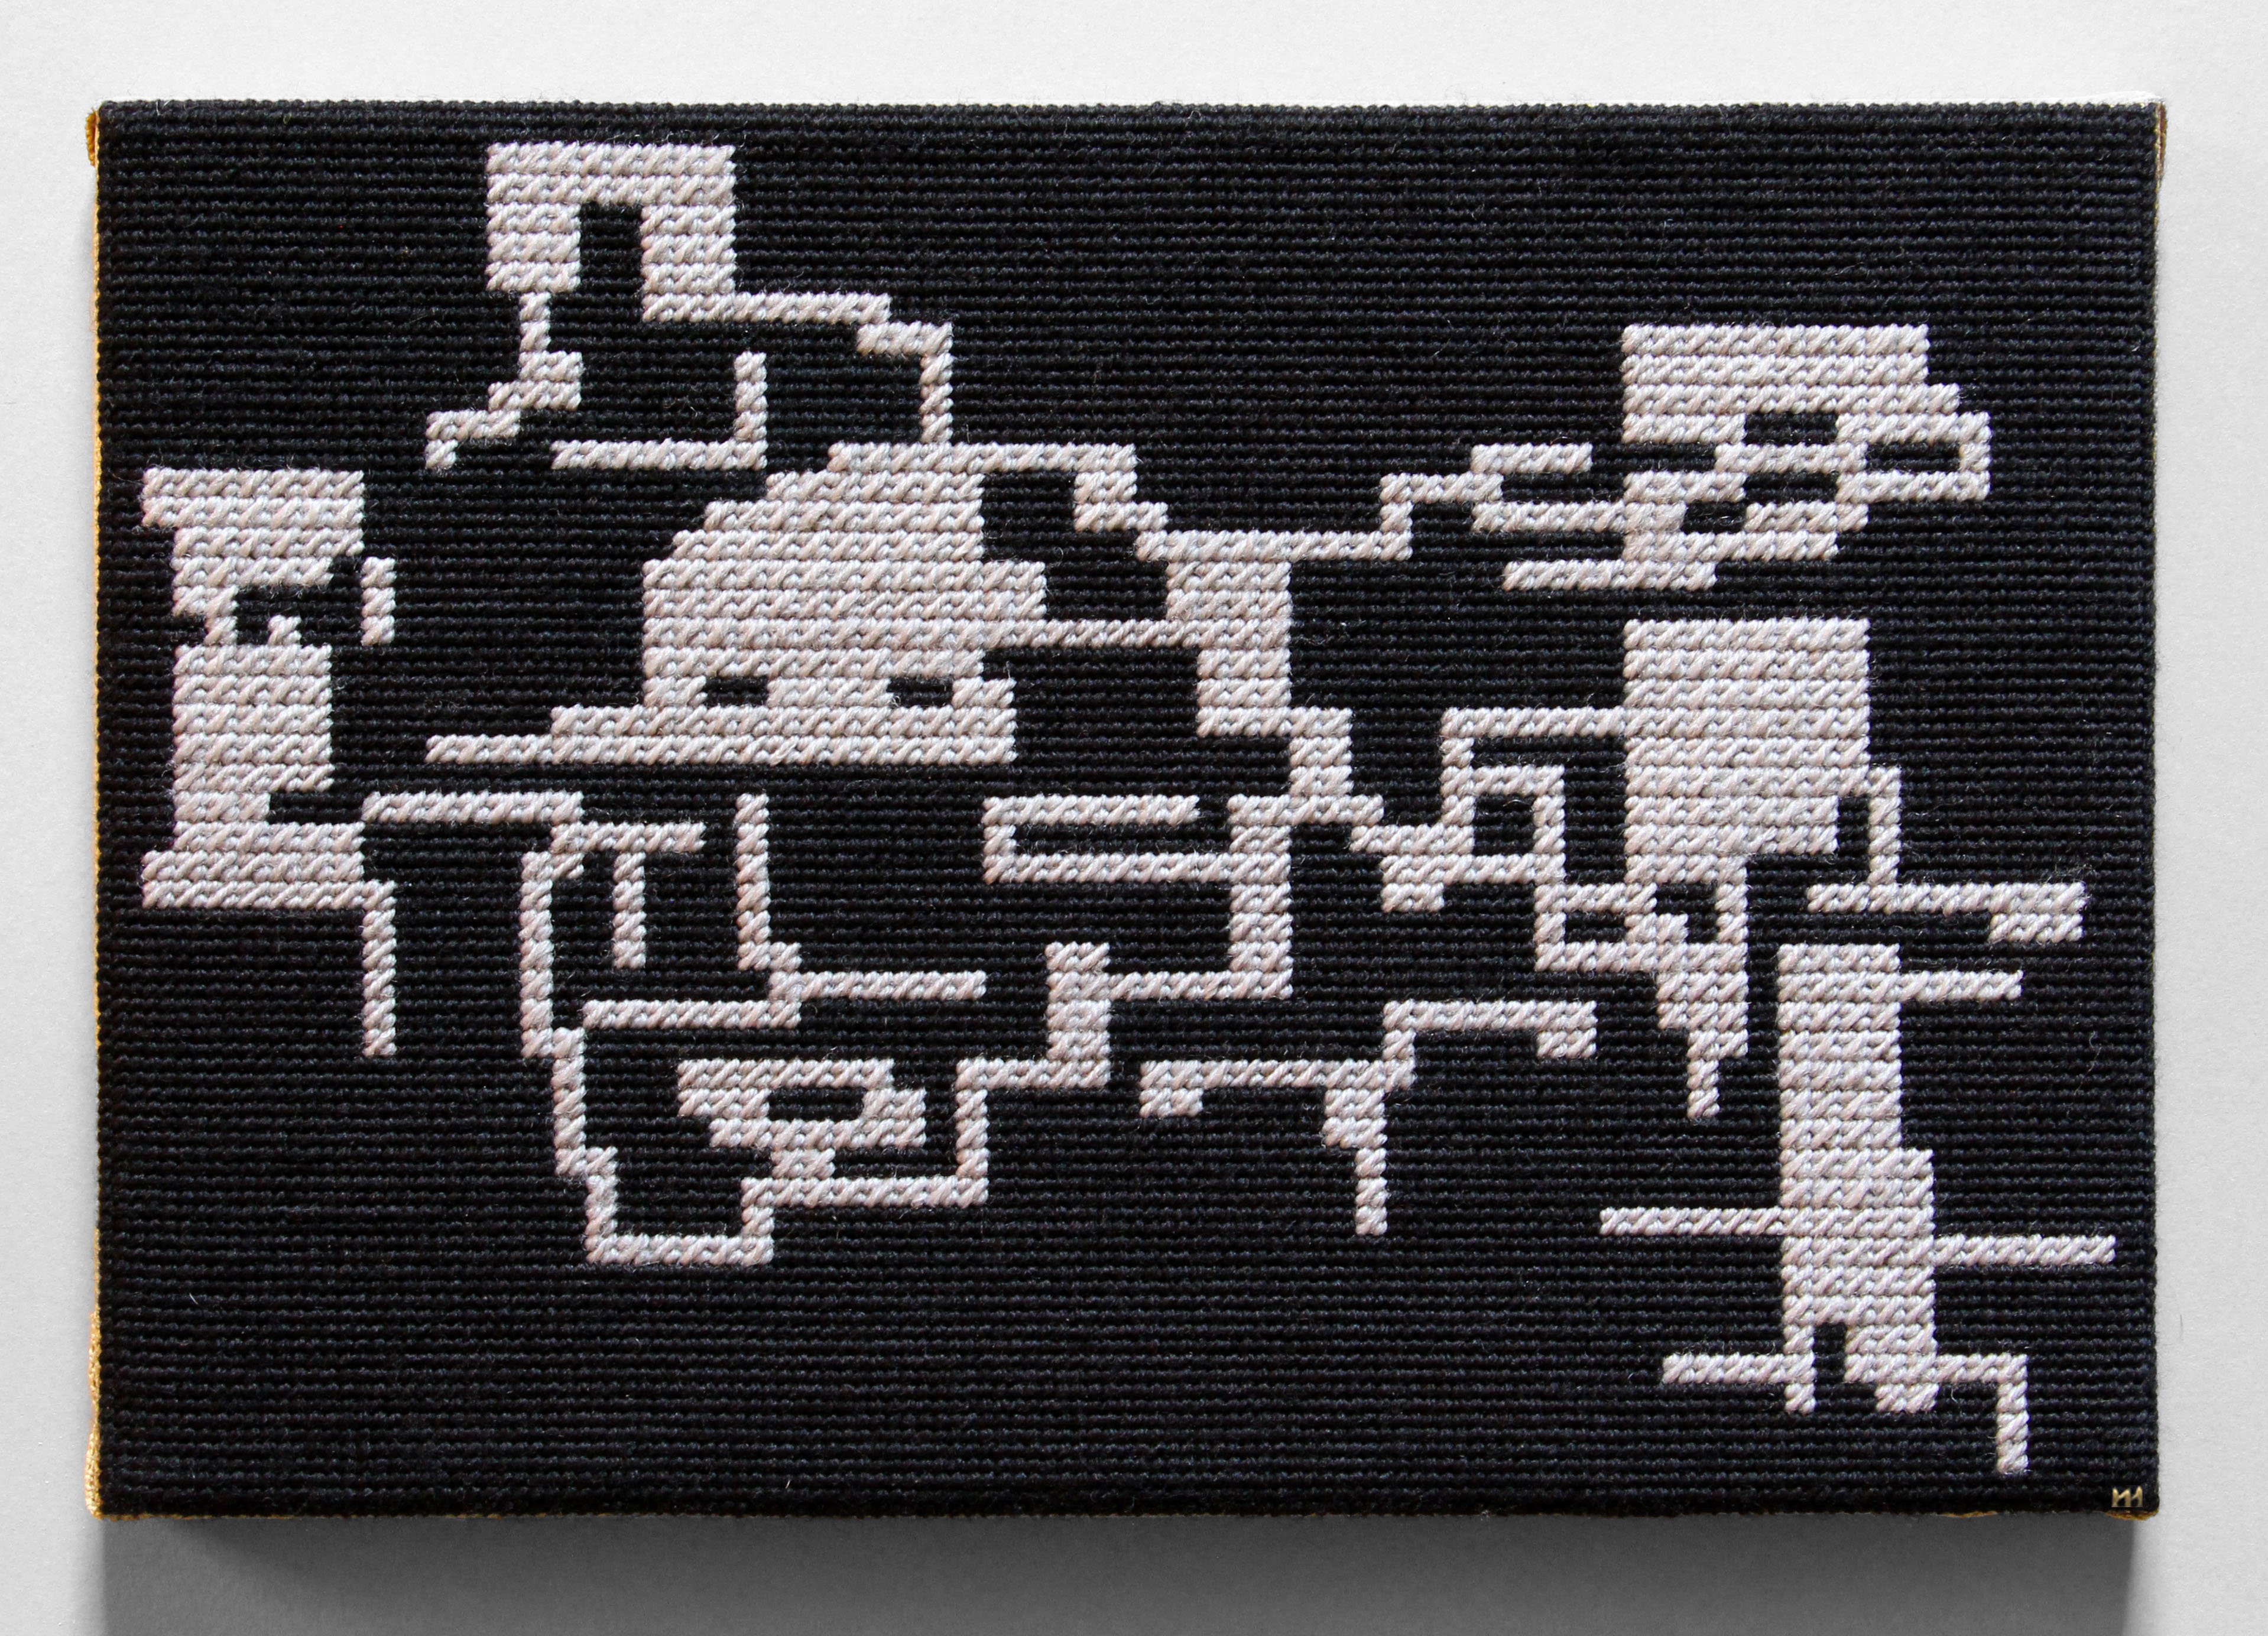  / Needlepoint of the map from *Metroid II: The Return of Samus* video game, in its Game Boy version. Art by artist Marine Beaufils.